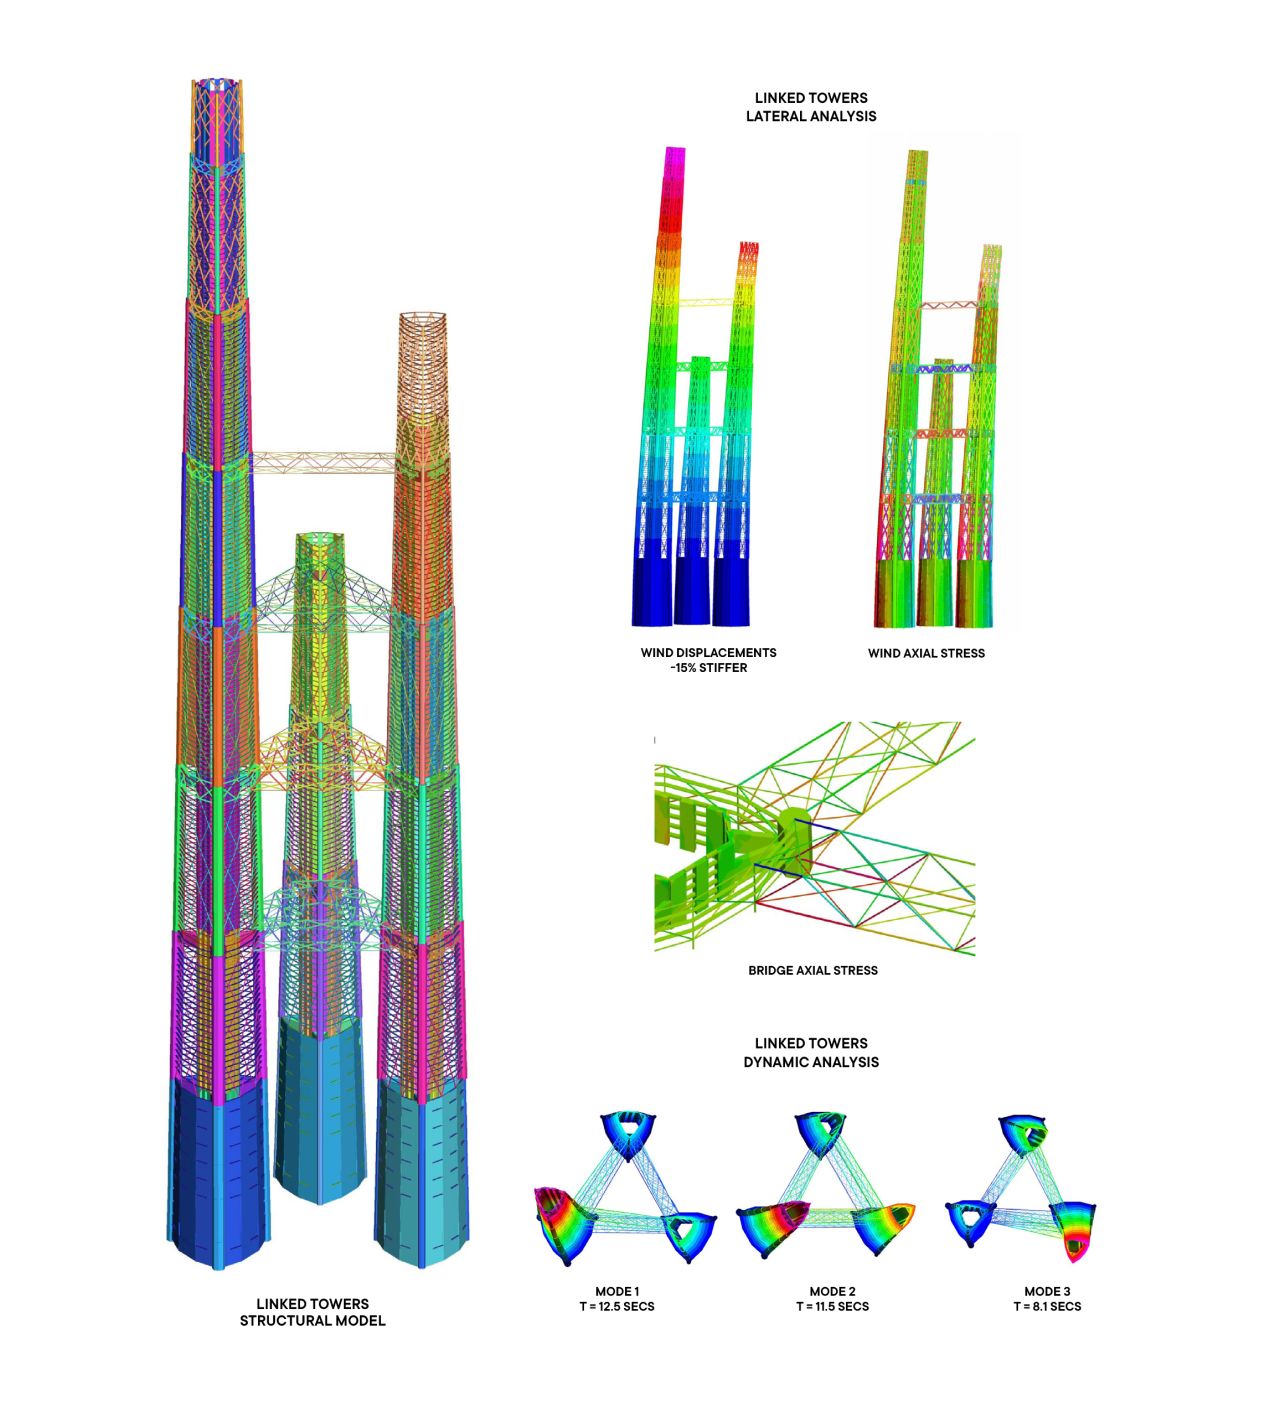 A computer model of 1 Dubai stress testing the structure in various conditions. Much of "Supertall | Megatall" consists of technical drawings and graphics of the inner workings of skyscrapers.